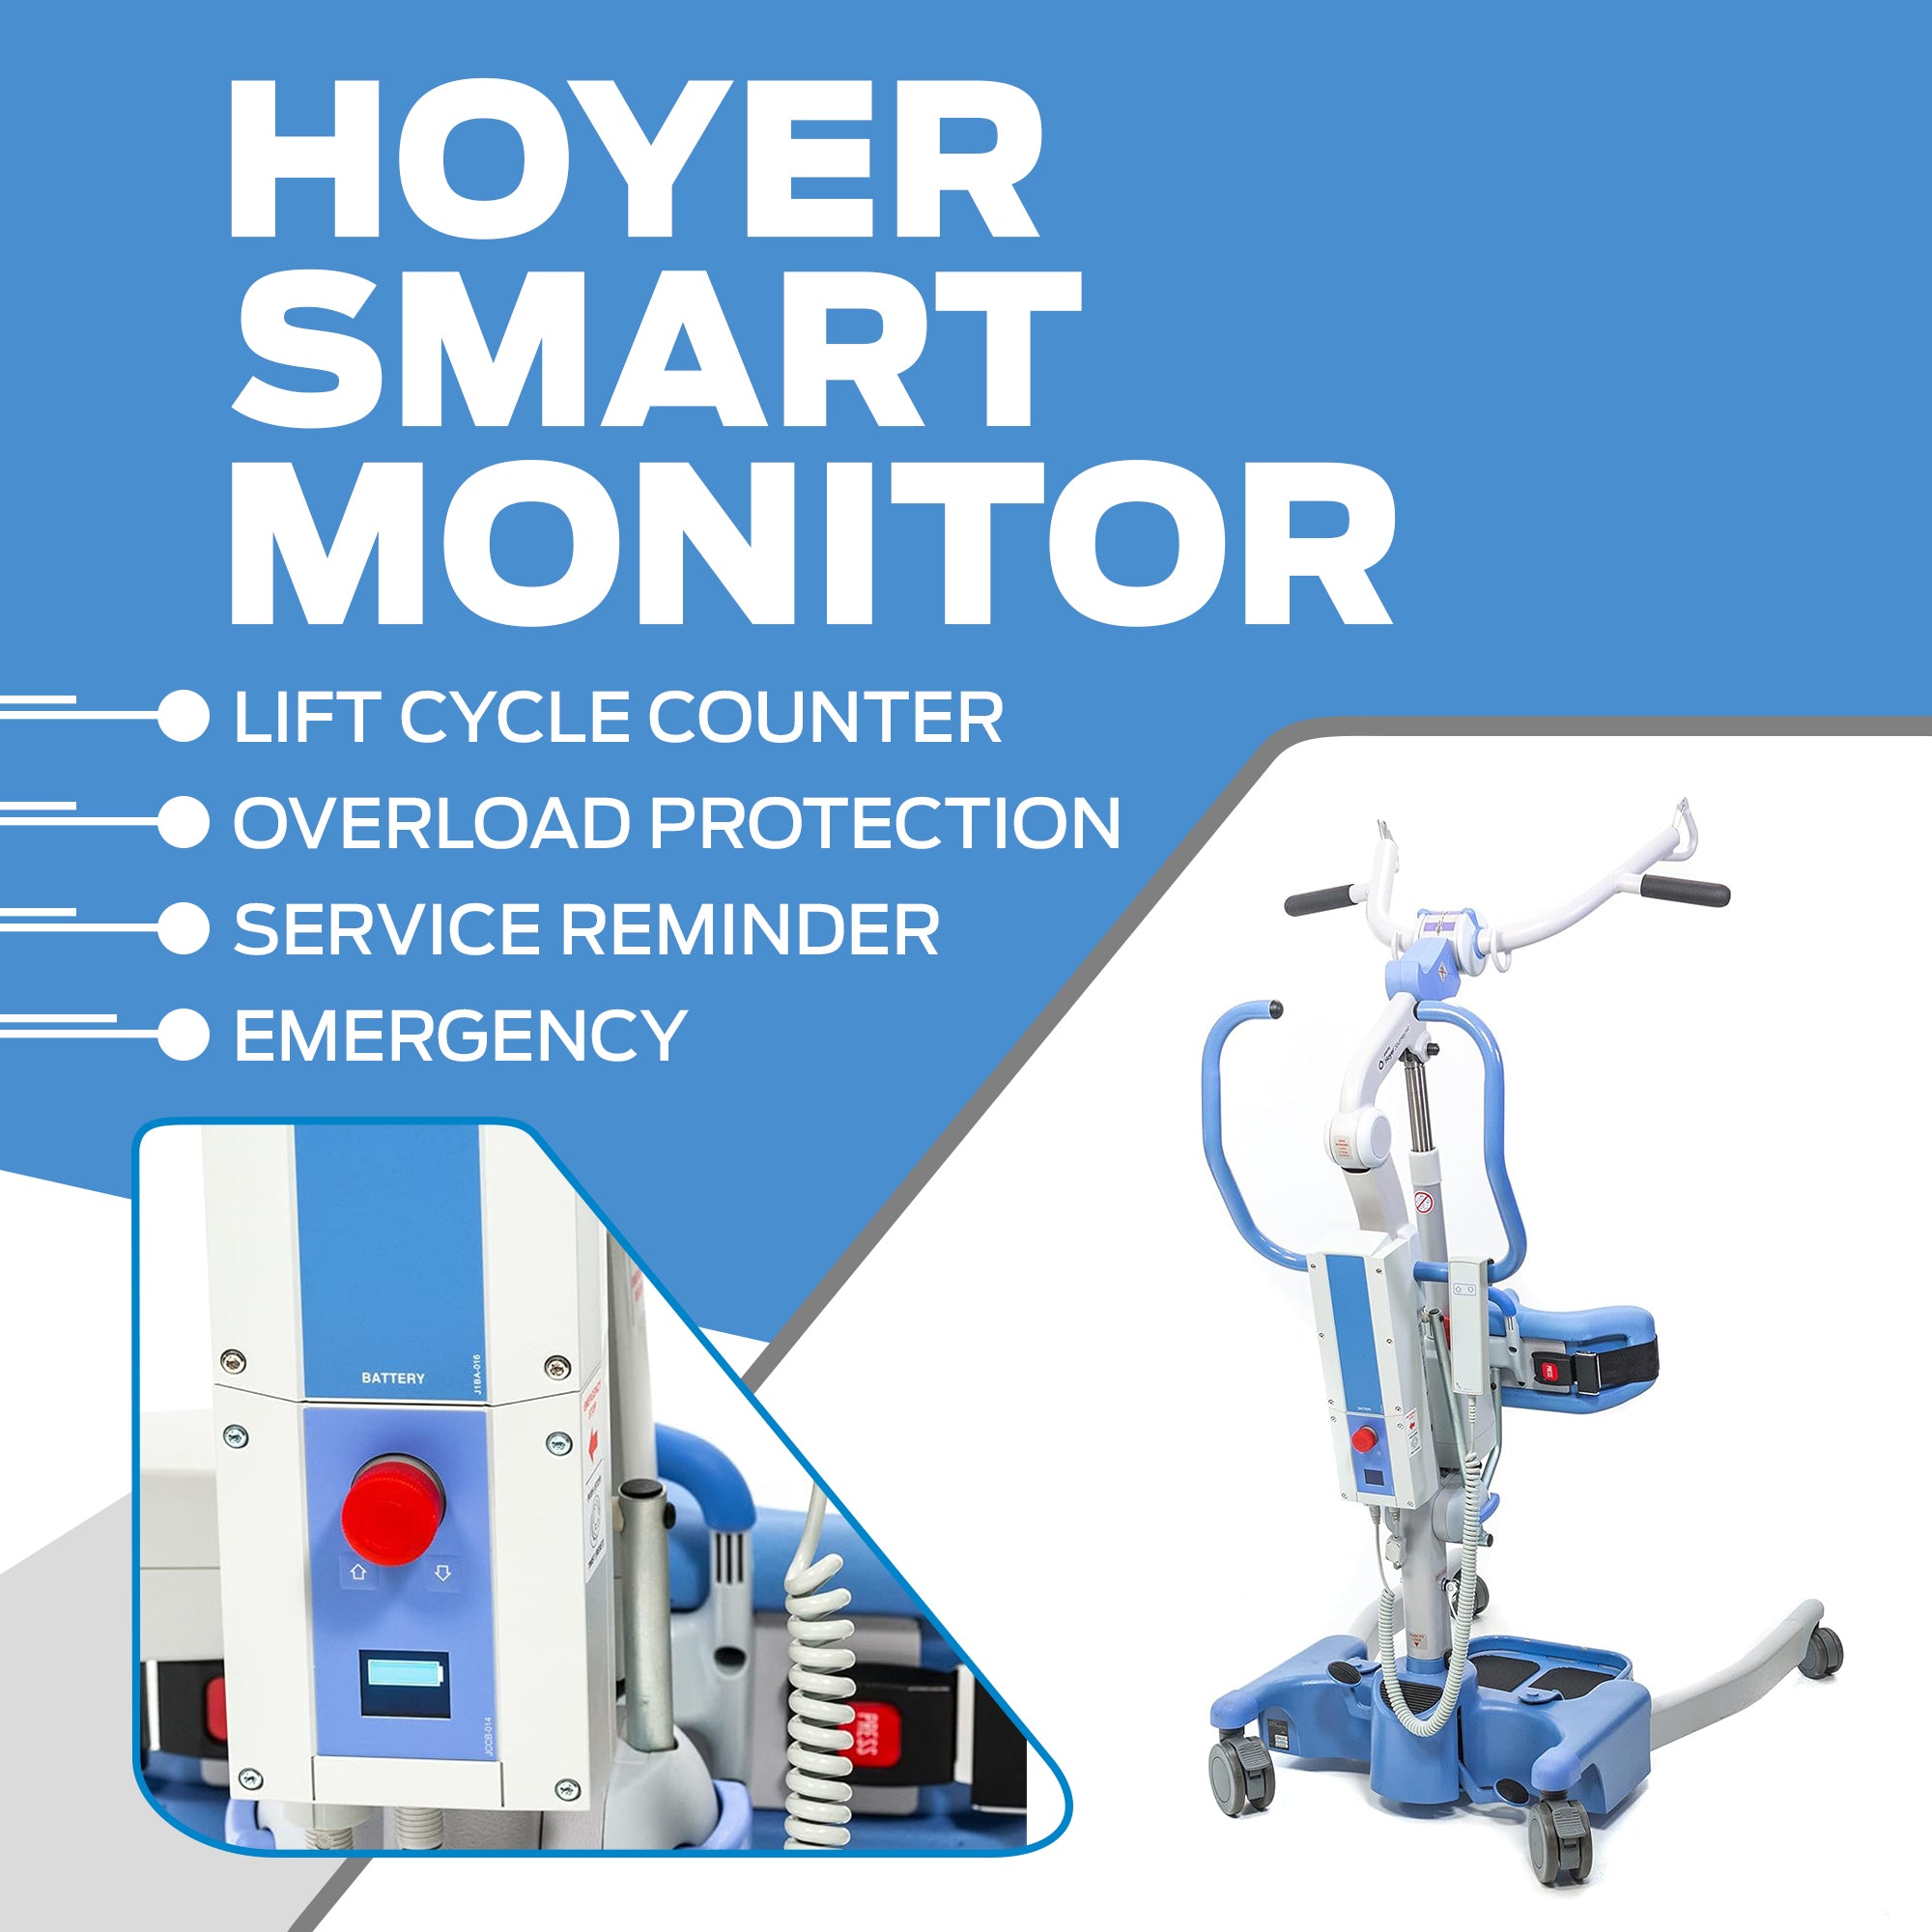 Joerns Hoyer Journey Sit to Stand Electric Power Patient Lift | Safe Working Load 340 Lbs.